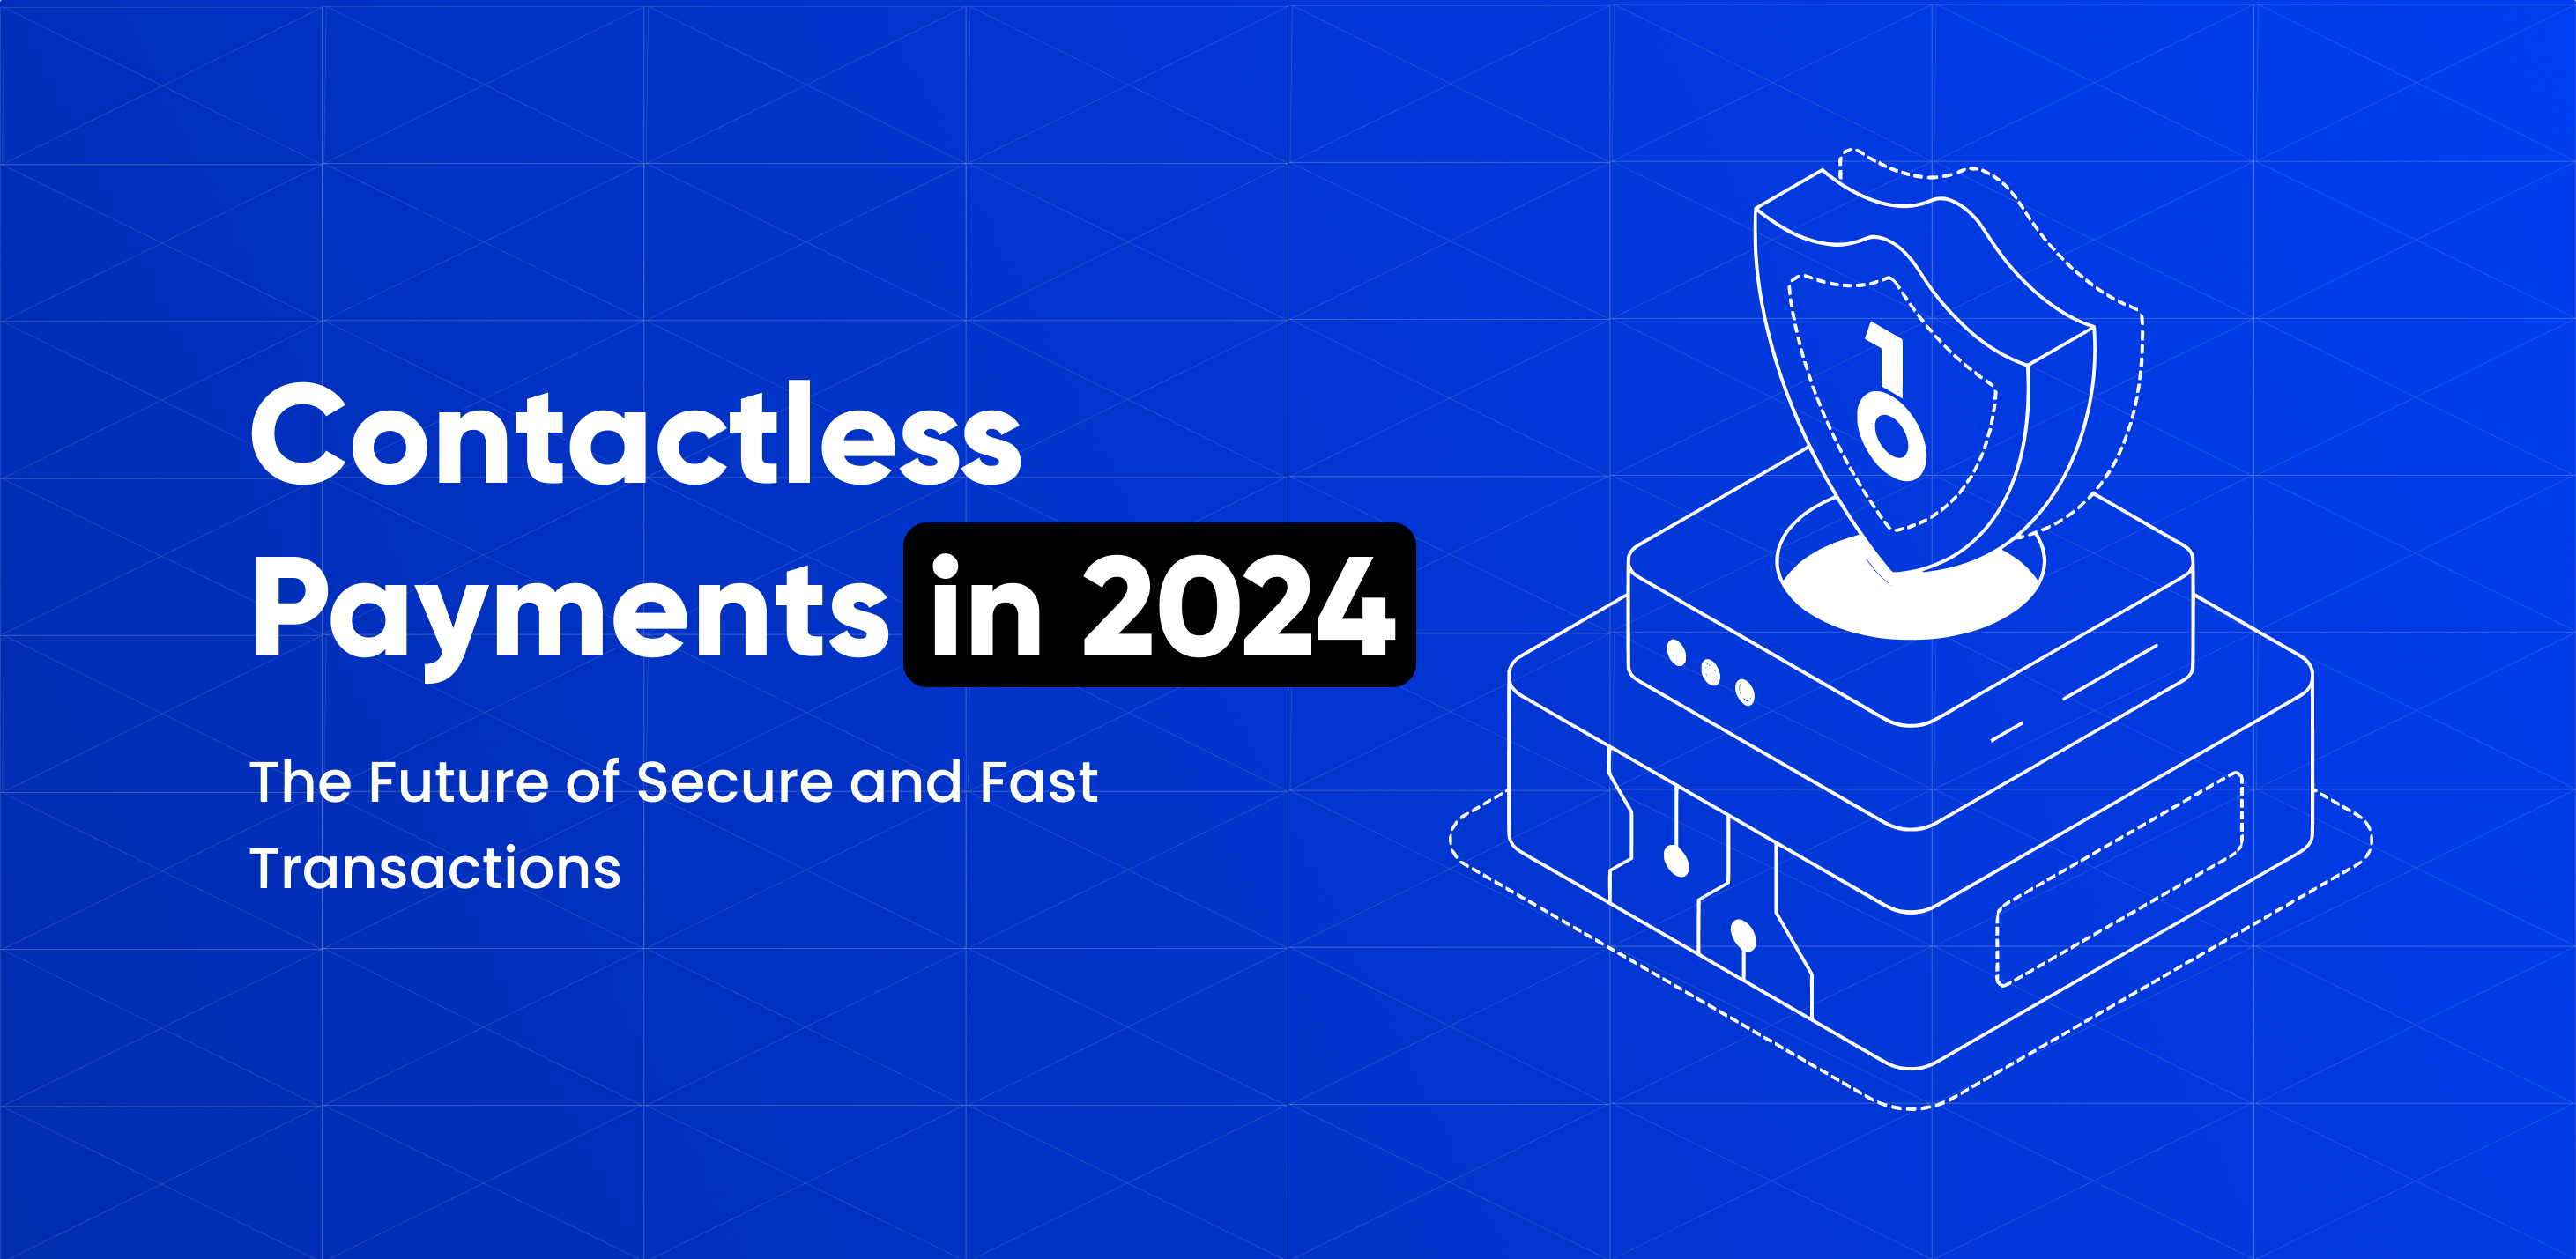 Contactless Payments in 2024: The Future of Secure and Fast Transactions